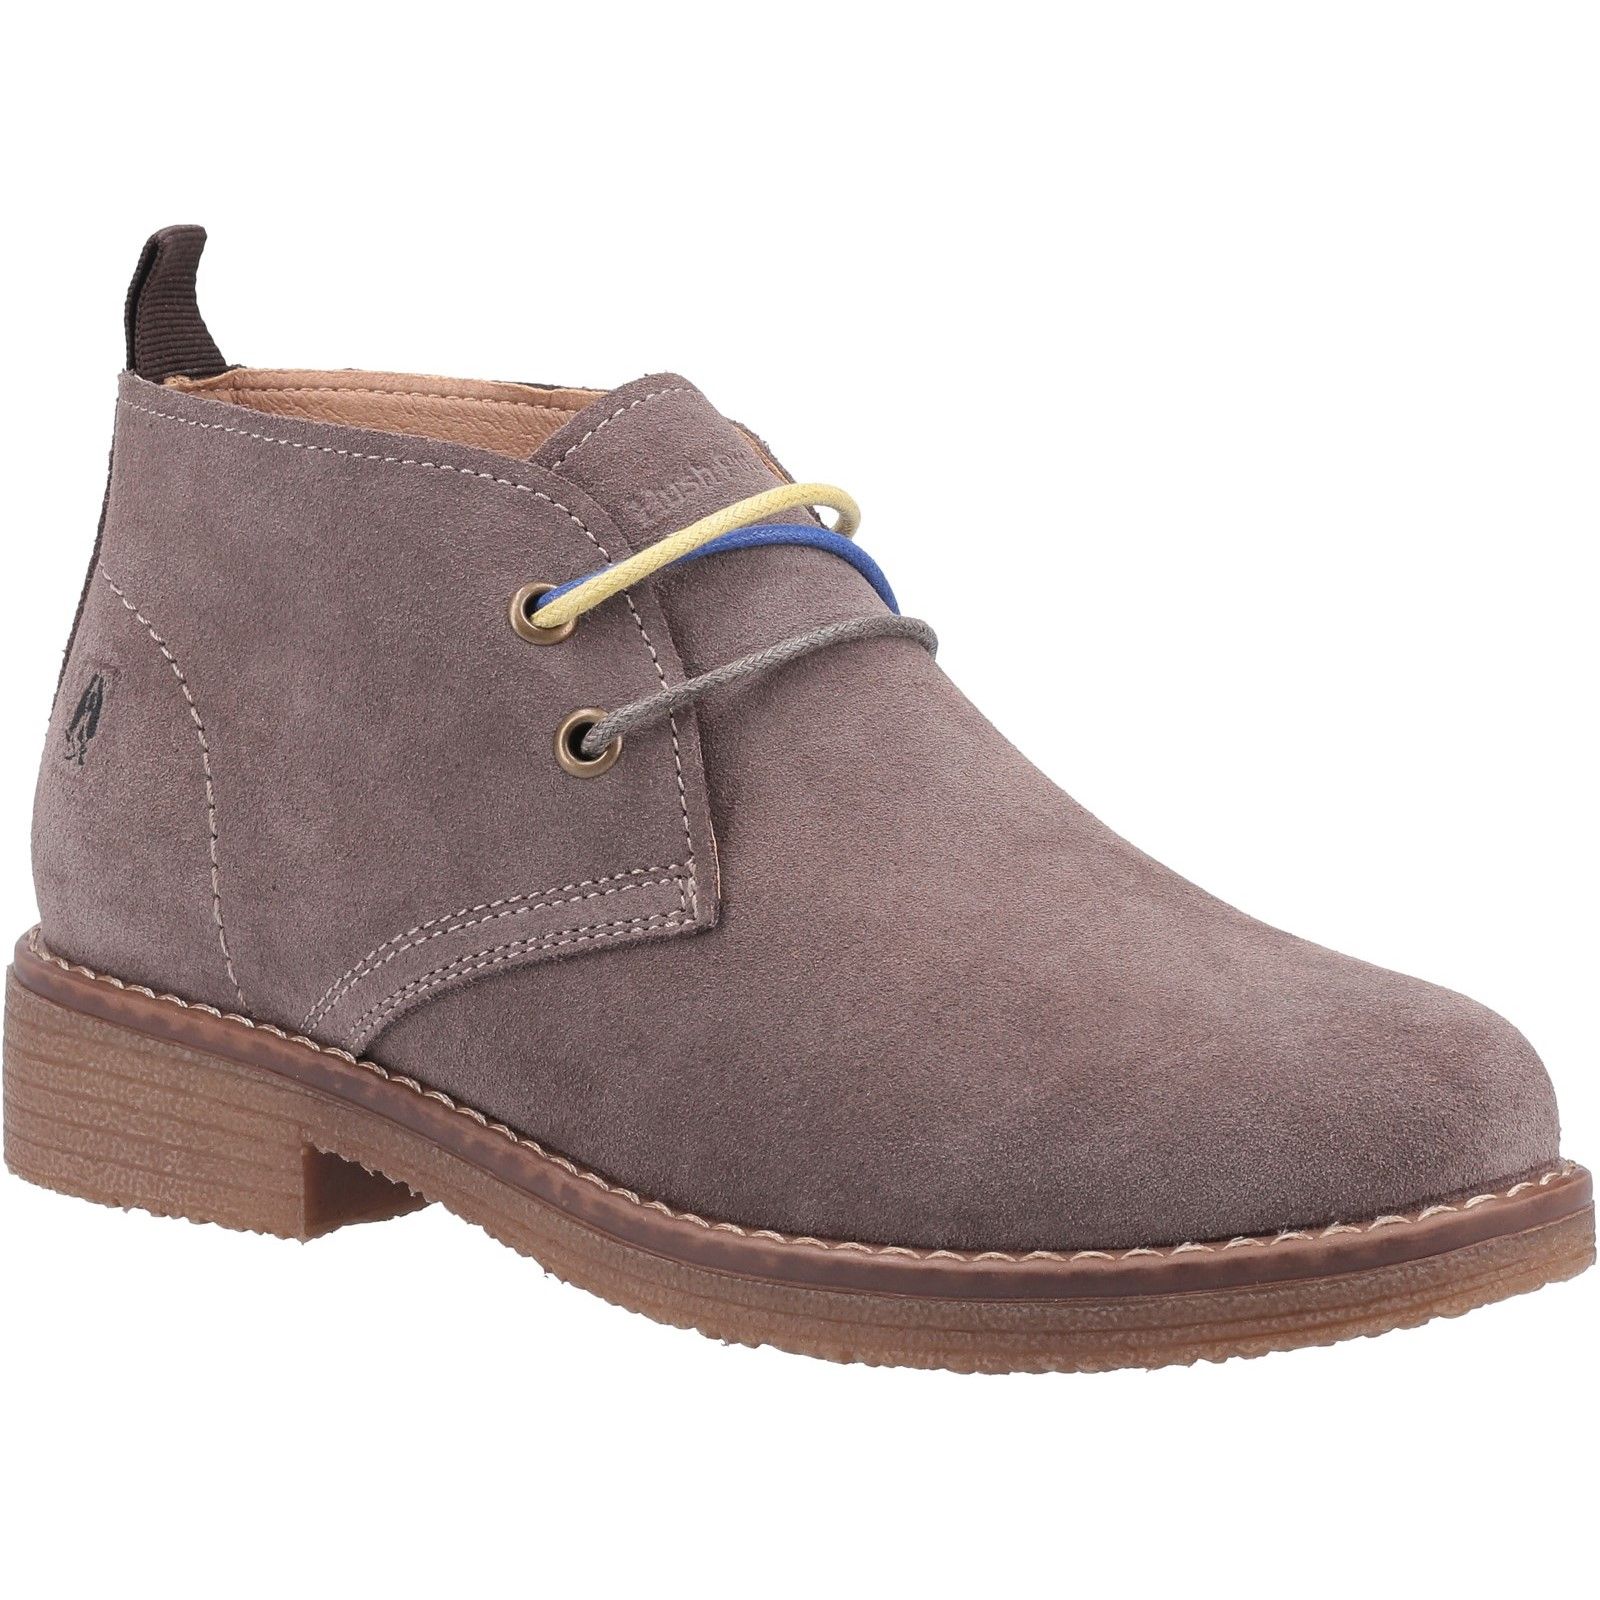 Marie Boot - Comes with 3 alternate lace colours, water resistant suede and memory foam insole for extra comfort.